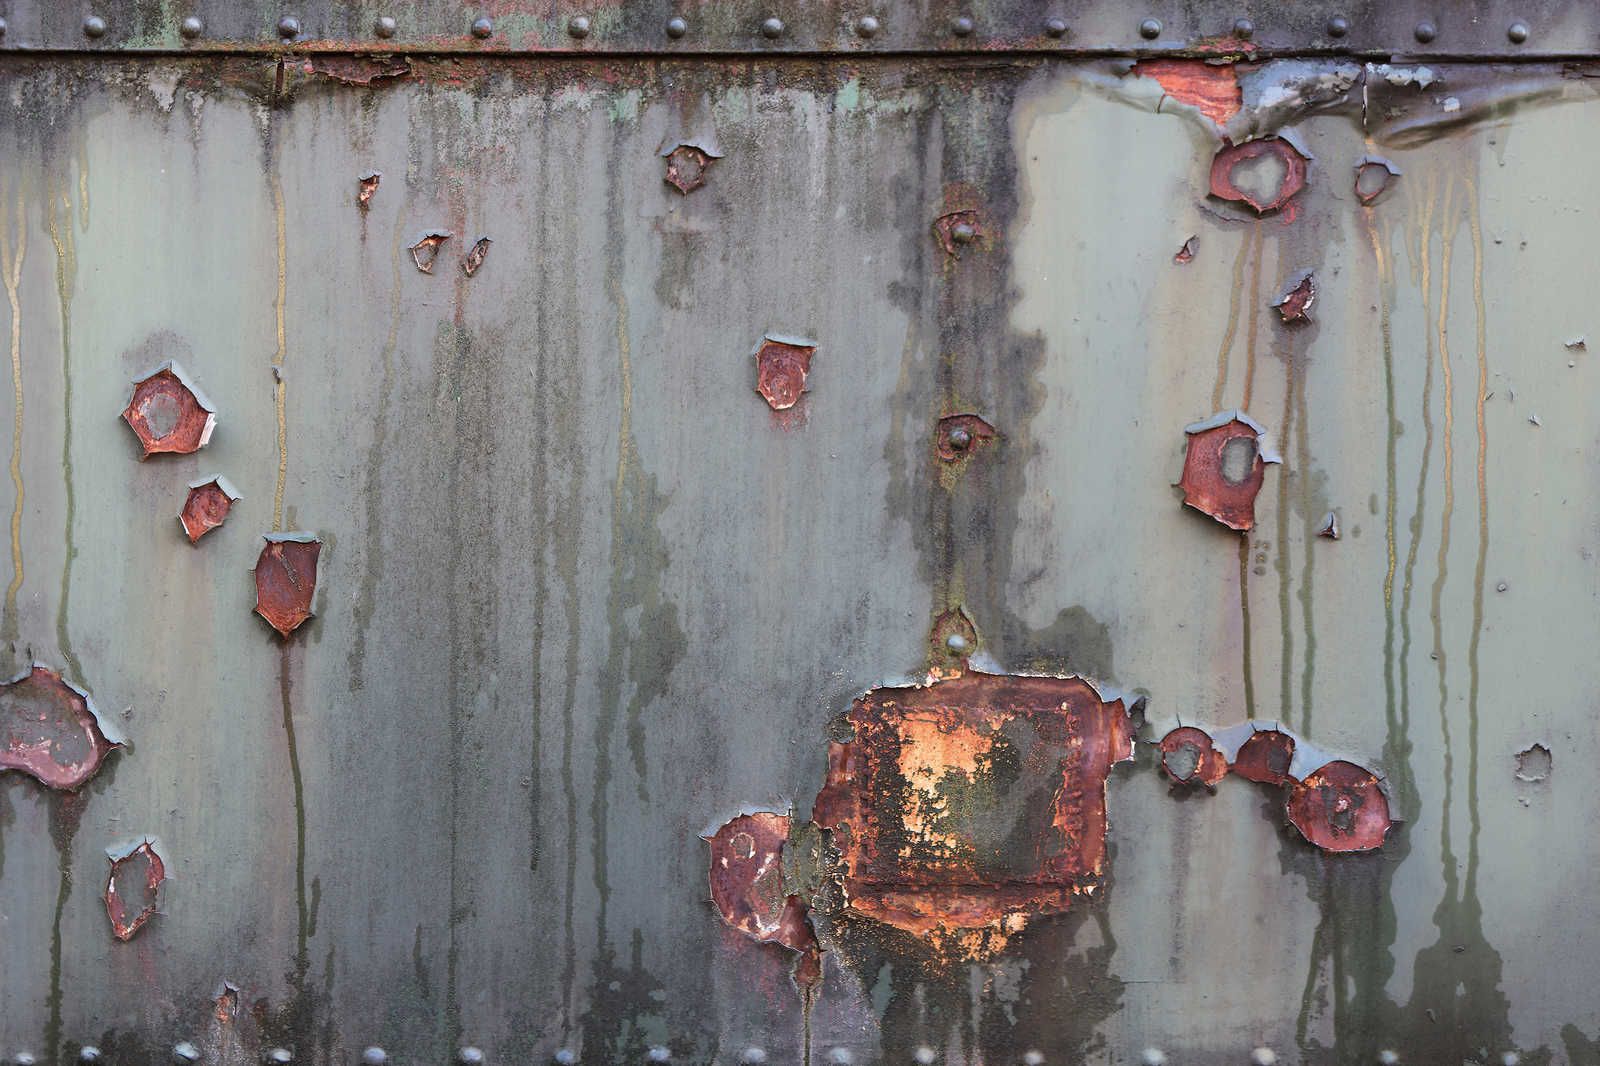             Metal Wall - Canvas painting Industrial with Rust & Used Look - 0.90 m x 0.60 m
        